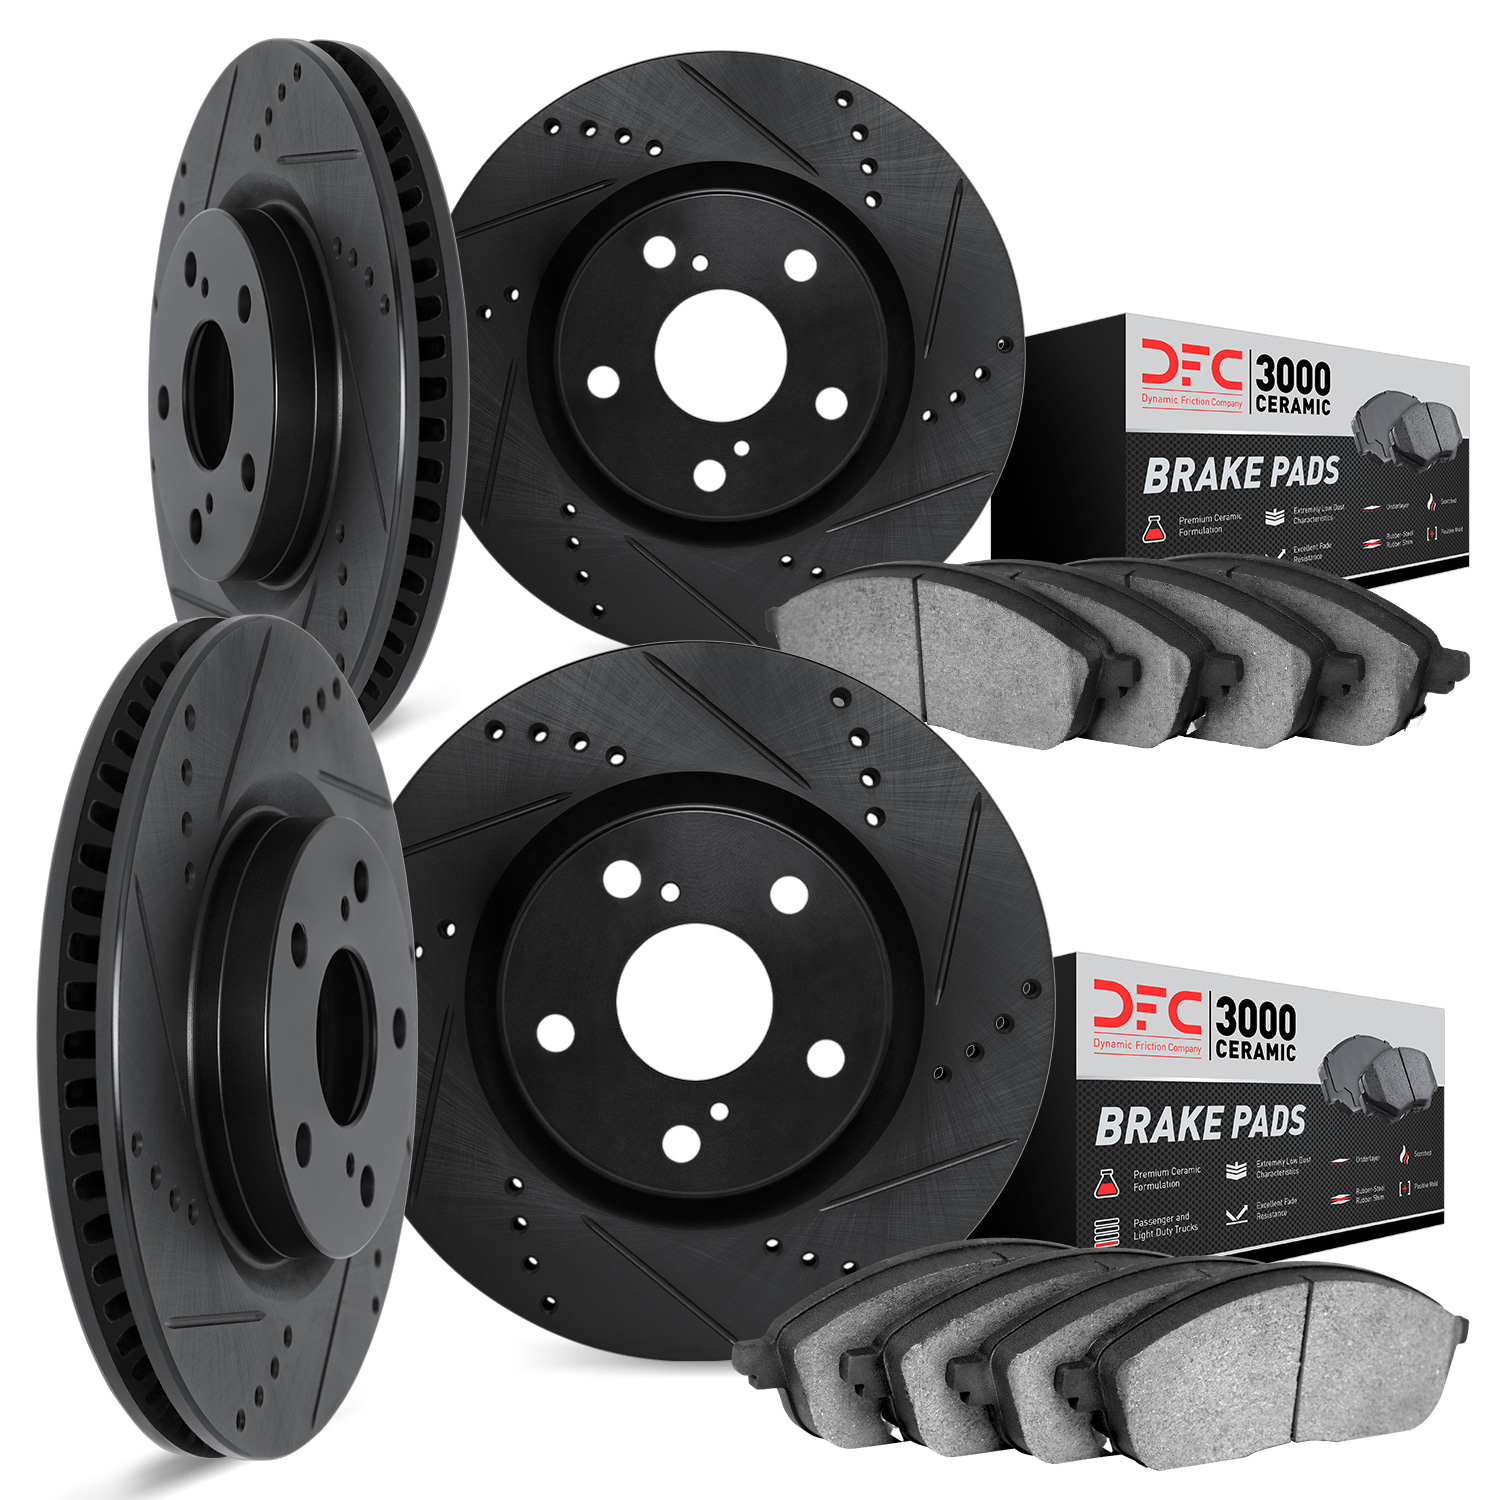 8304-13037 Drilled/Slotted Brake Rotors with 3000-Series Ceramic Brake Pads Kit [Black], 2006-2014 Subaru, Position: Front and R